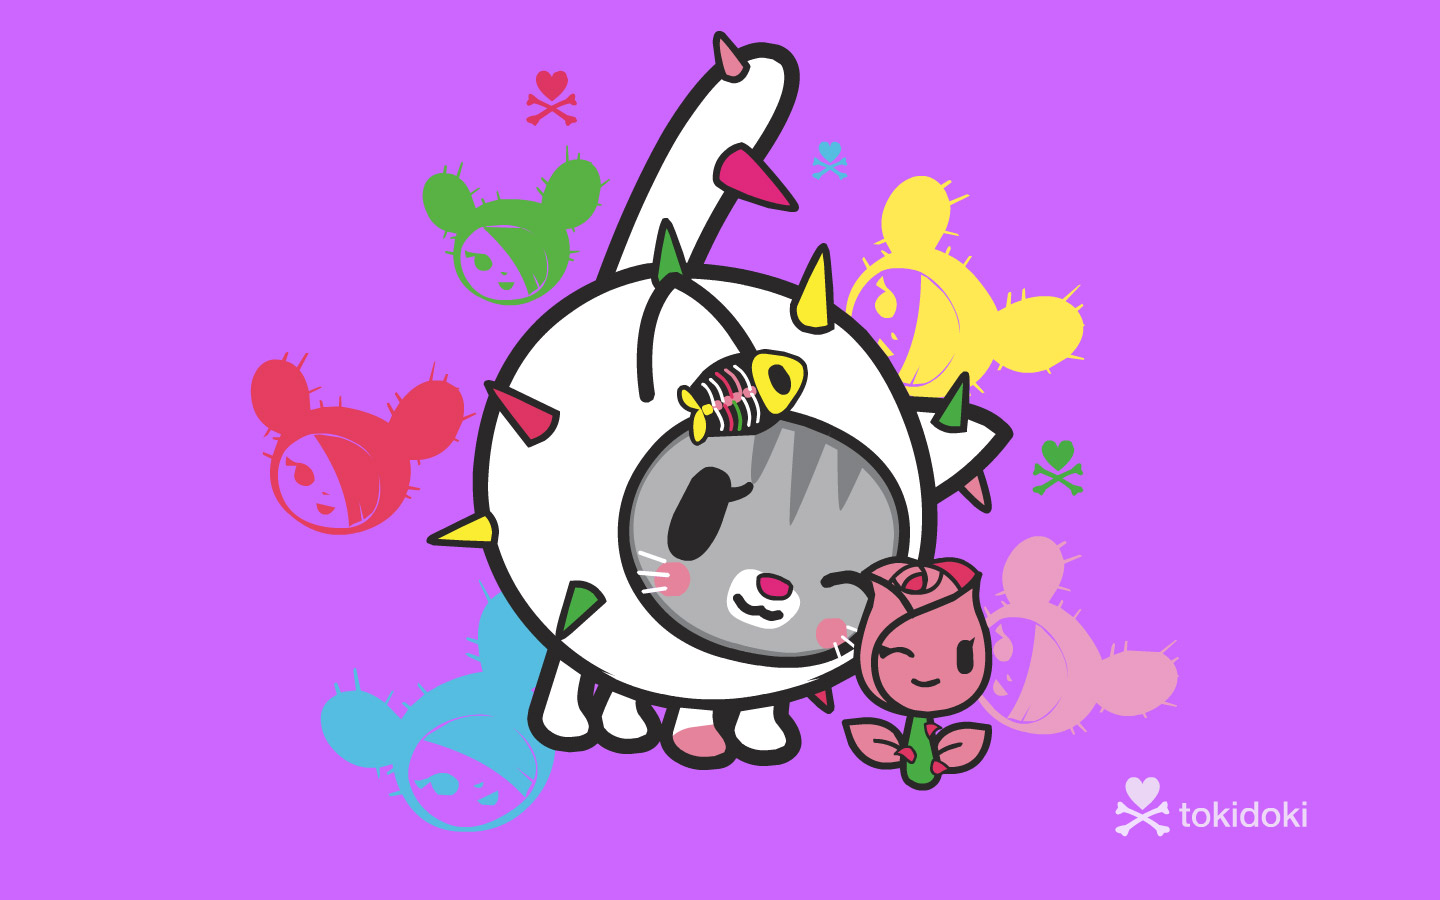 Tokidoki Backgrounds, Compatible - PC, Mobile, Gadgets| 1440x900 px